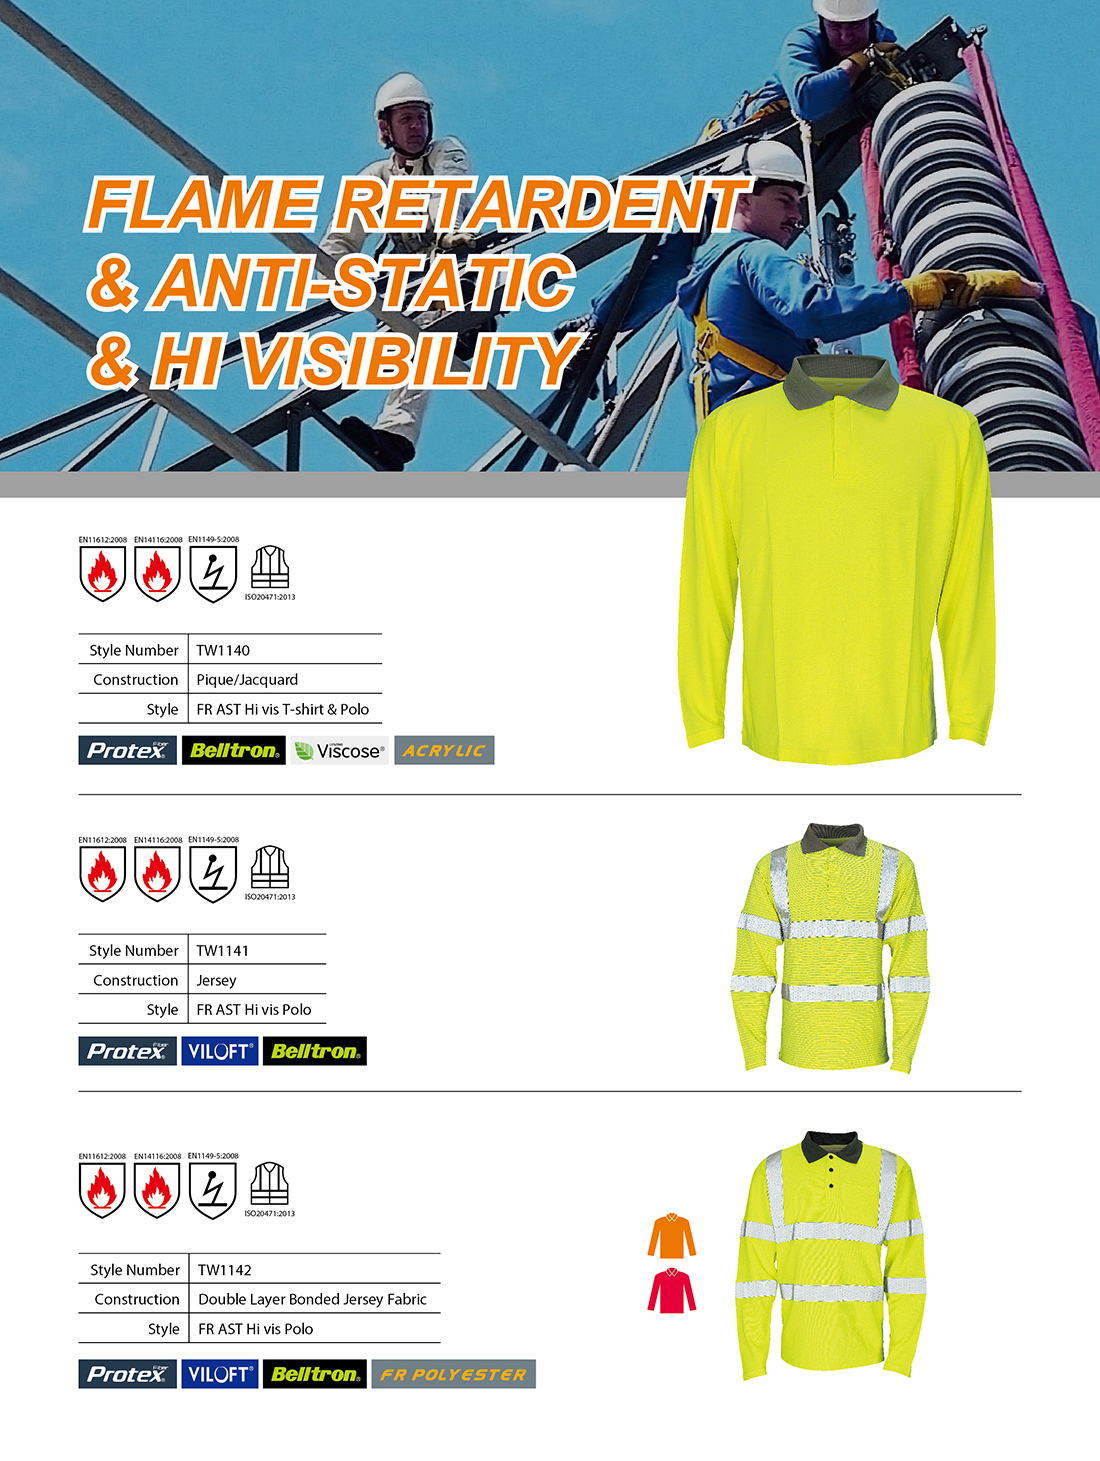 Flame Retardent and Anti-Static and Hi Visibility